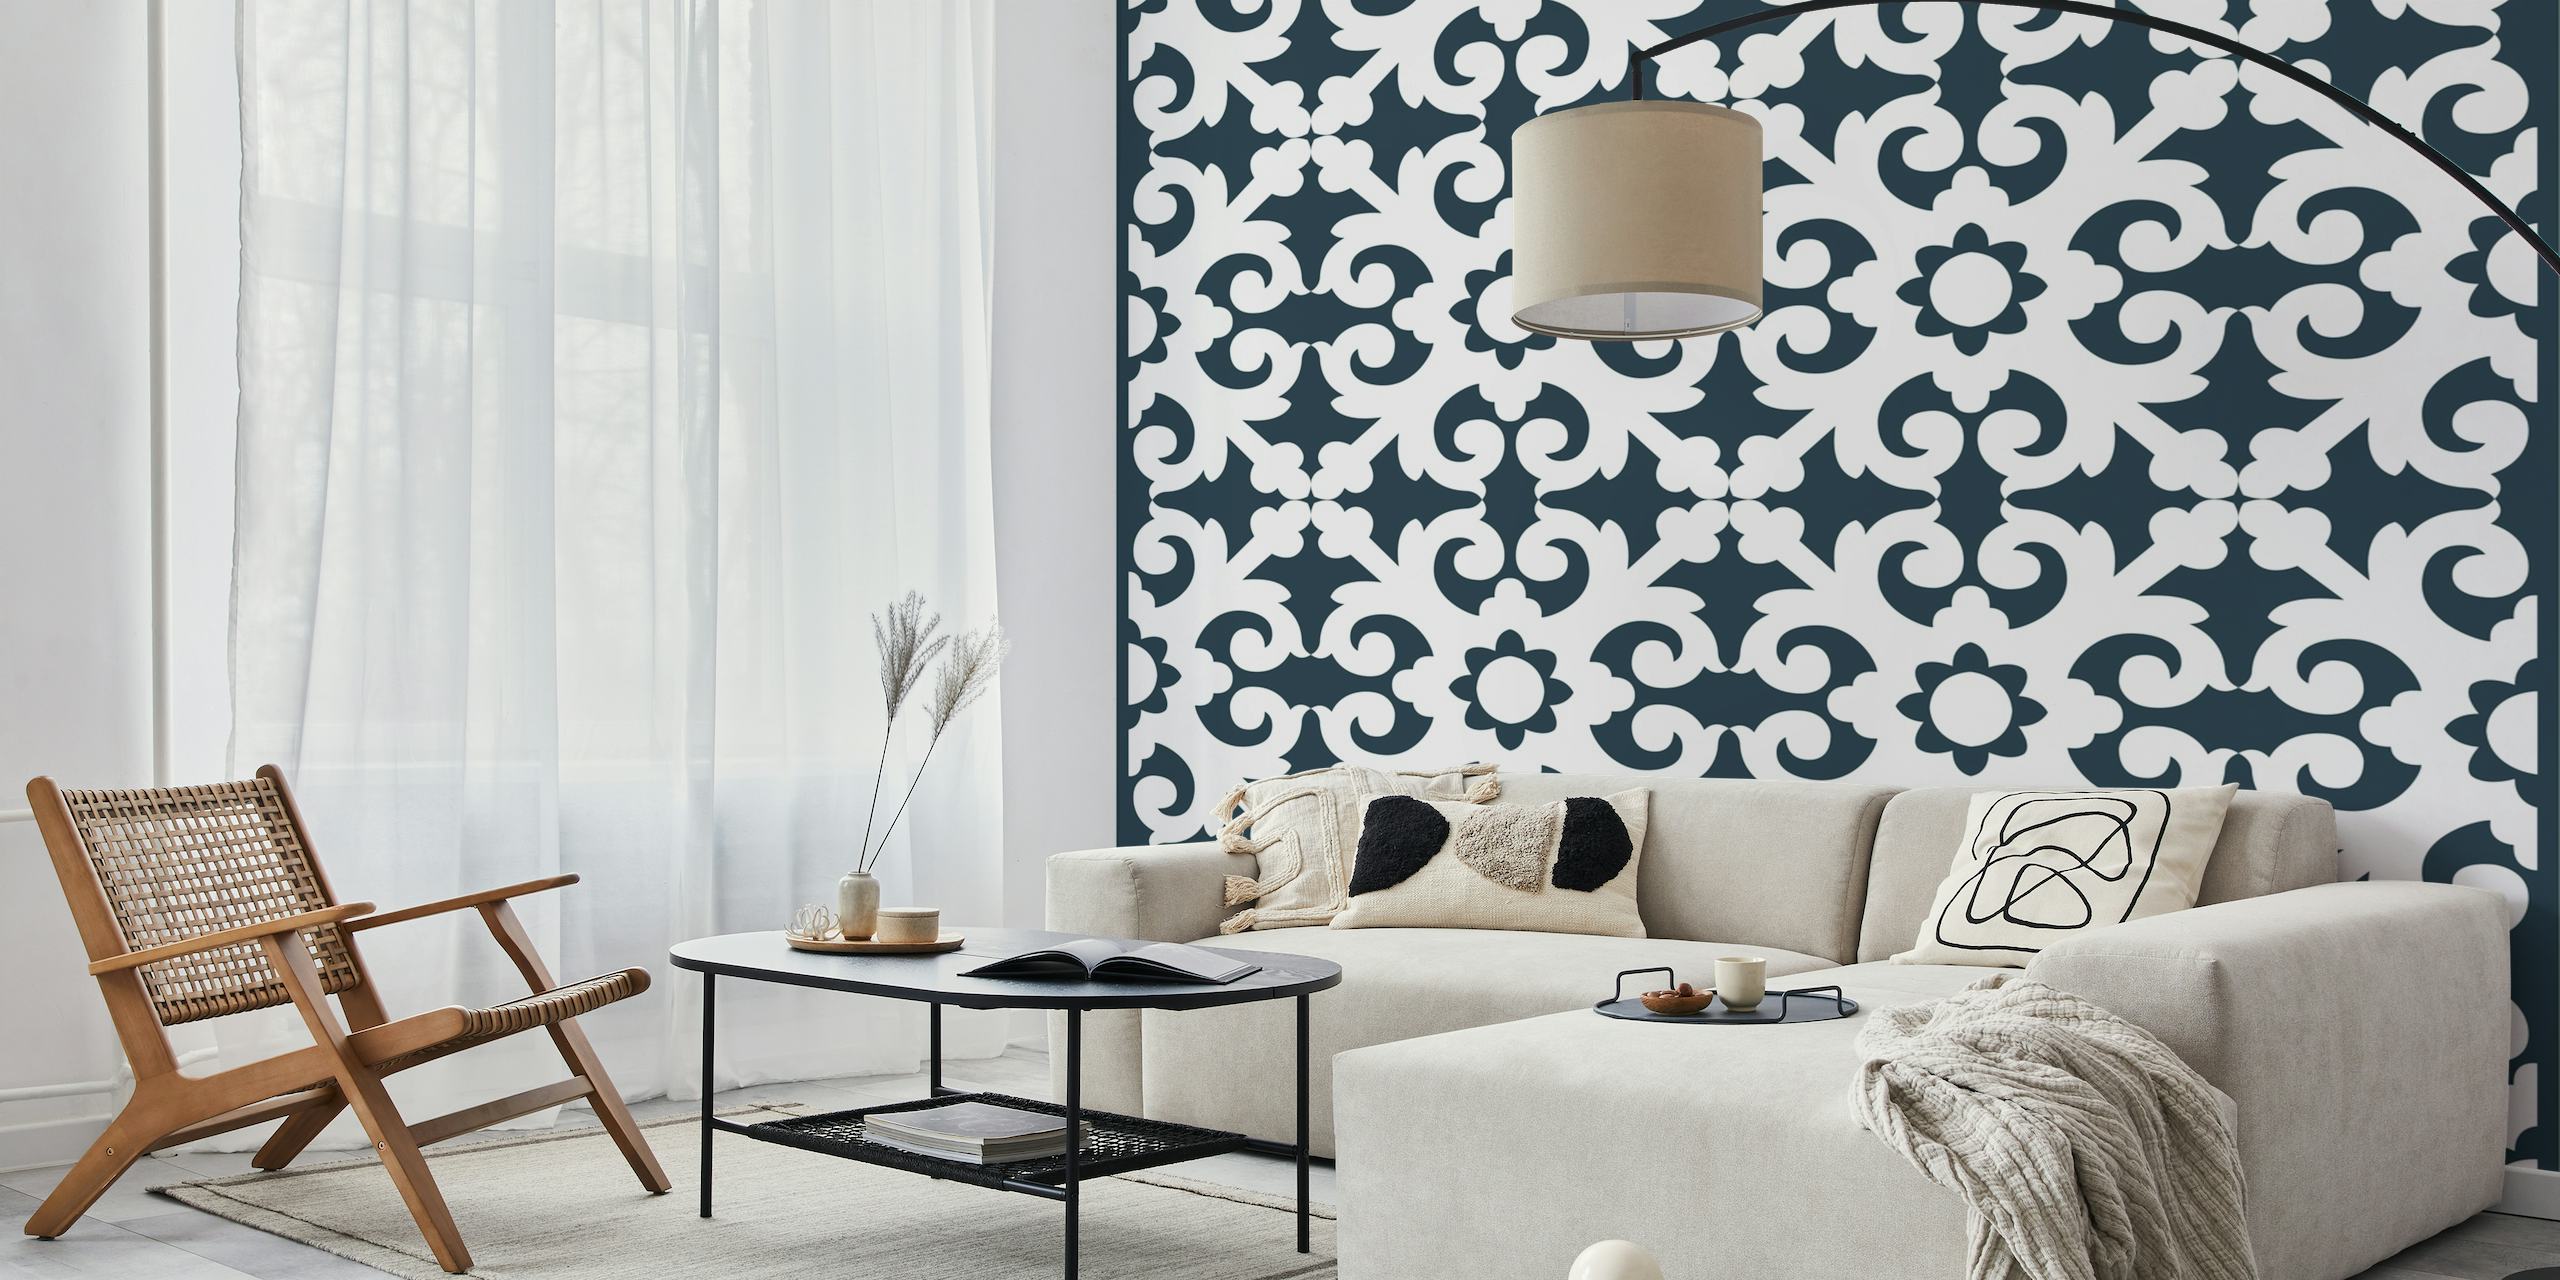 Sophisticated charcoal and white ornamental wall mural design from happywall.com